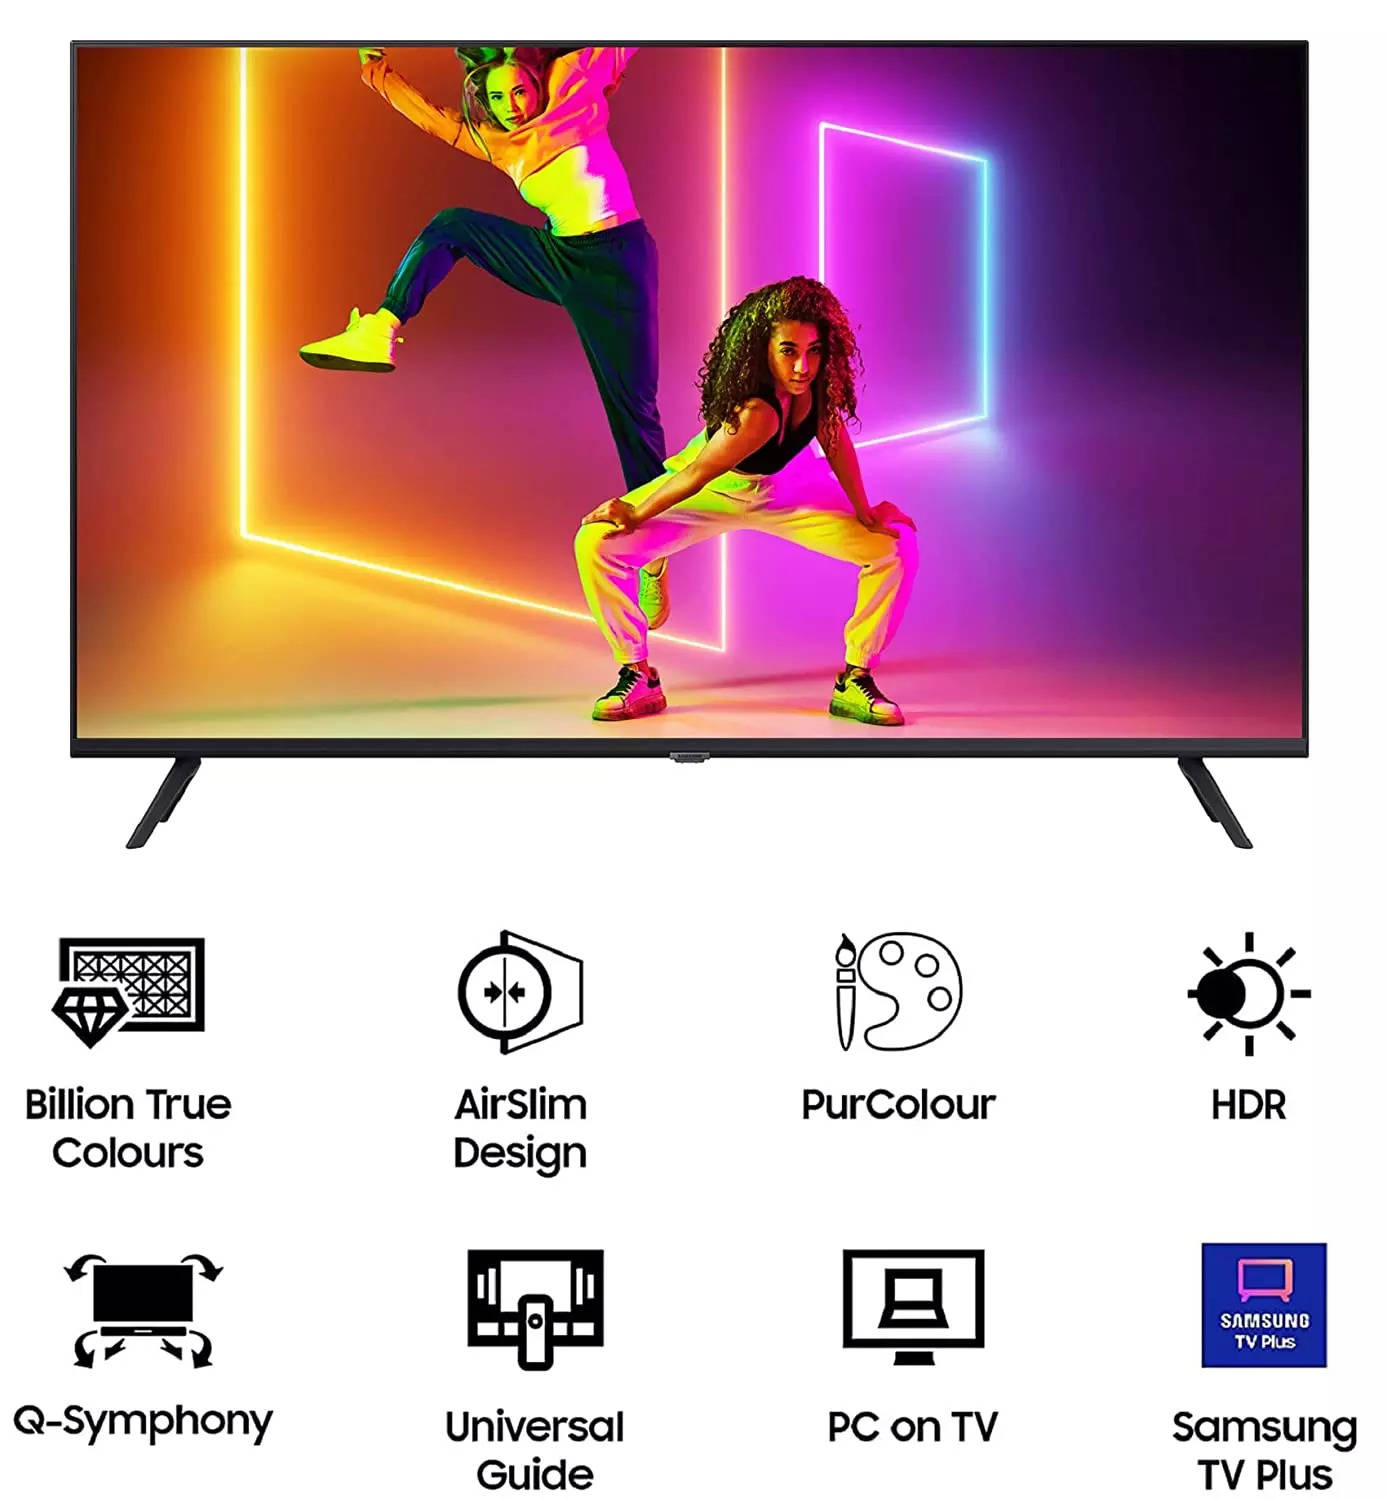 Philips 4K TV: Philips launches 65-inch 4K LED smart TV in India